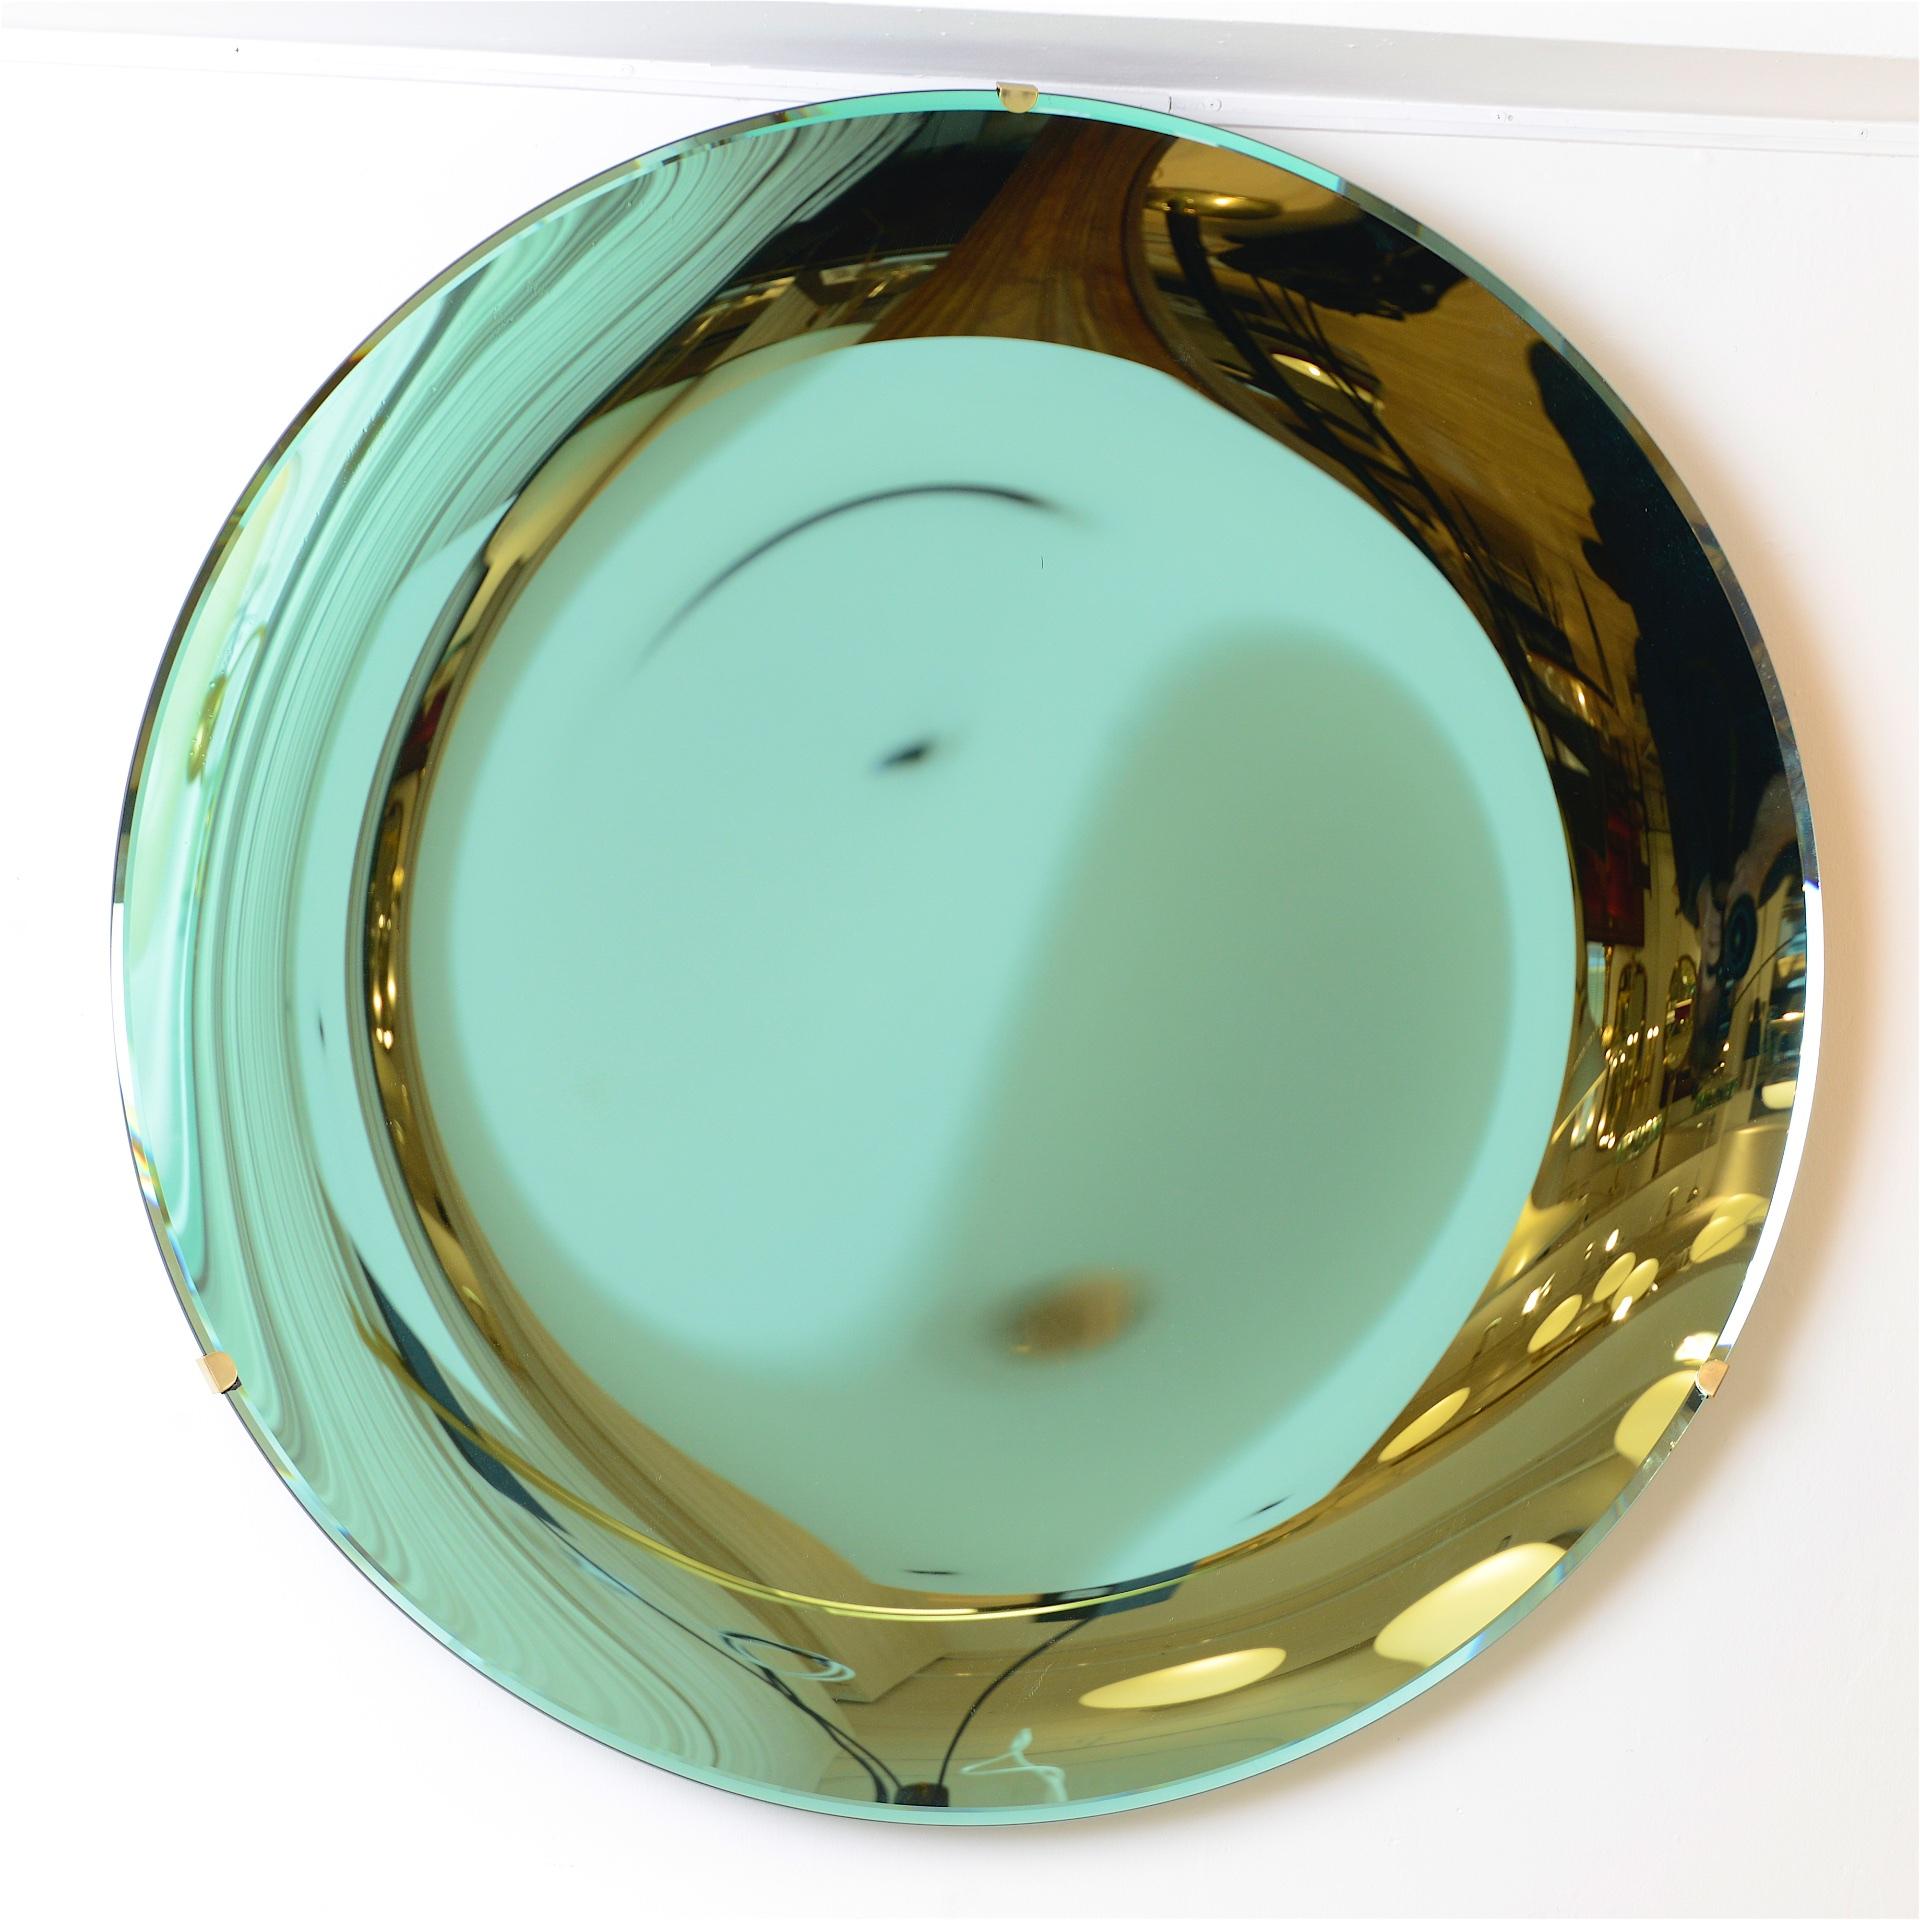 Green glass concave mirror, with brass wall fixing
Wonderful reflections

Available in pink gold and blue.